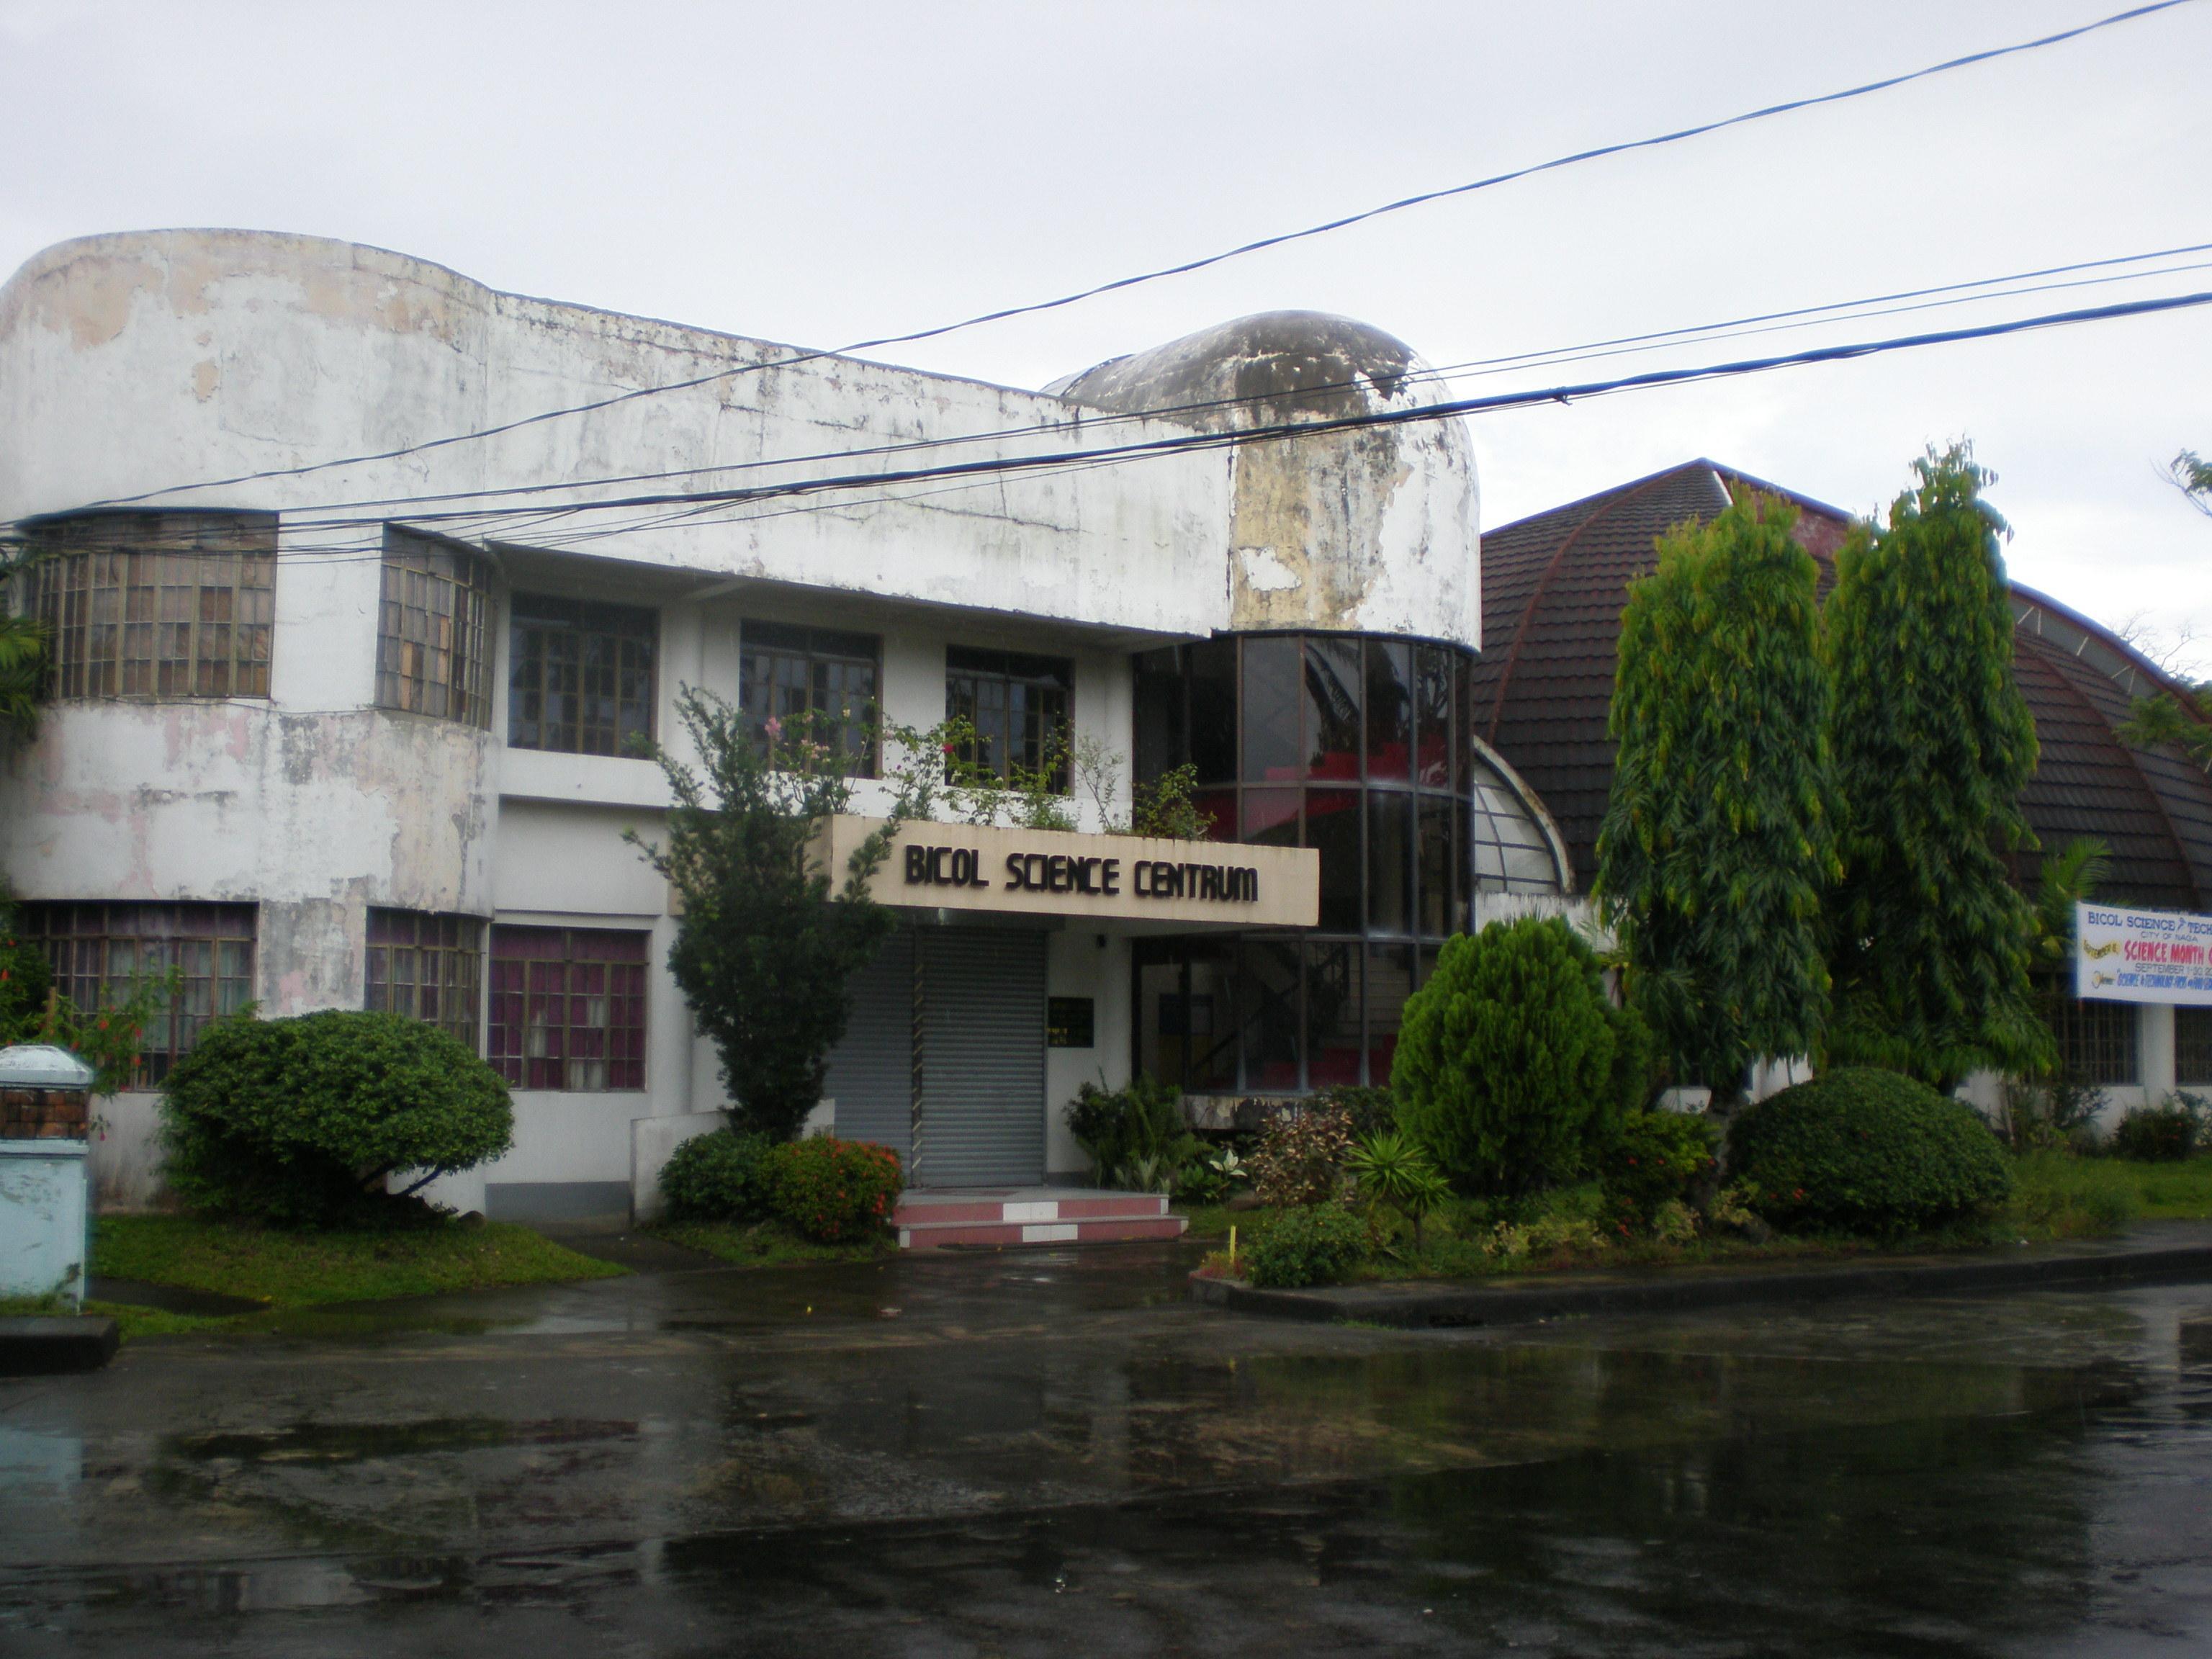 The Bicol Science and Technology Centrum